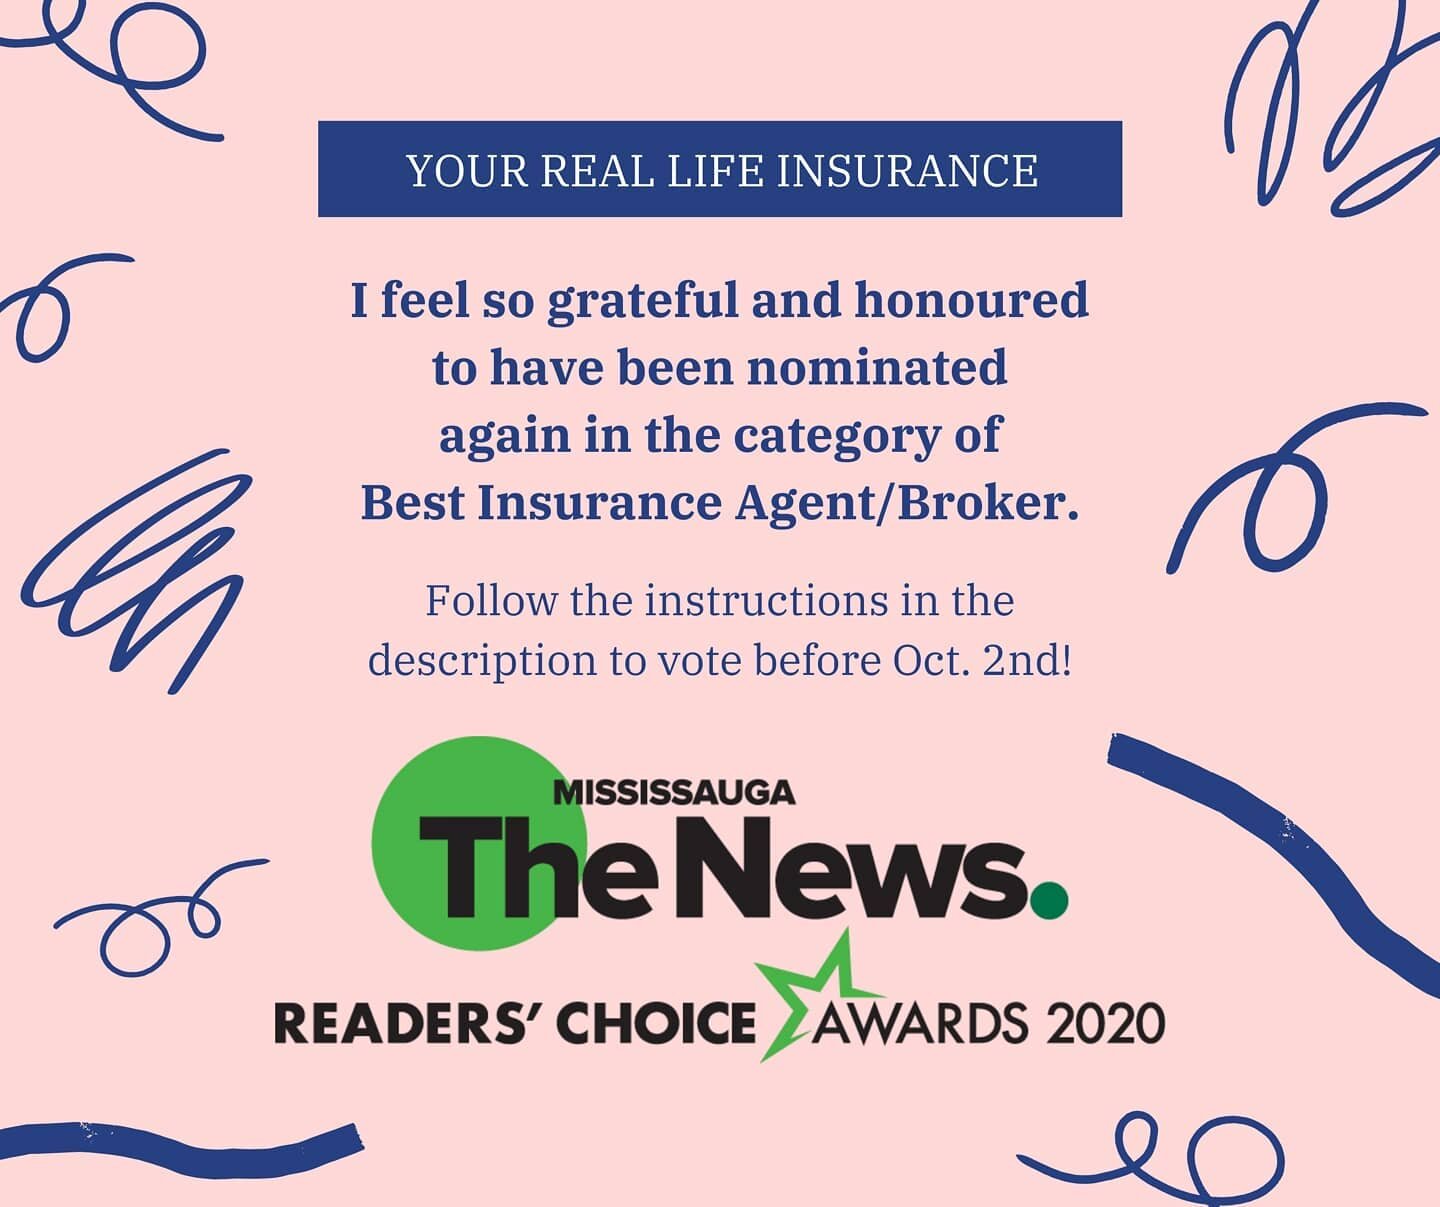 Voting is now open for this year's @mississaugadotcom Reader's Choice Awards and I feel so honoured to have been nominated again!

https://www.mississauga.com/readerschoice

If you'd like to vote for me, go to the link above, select People/Profession